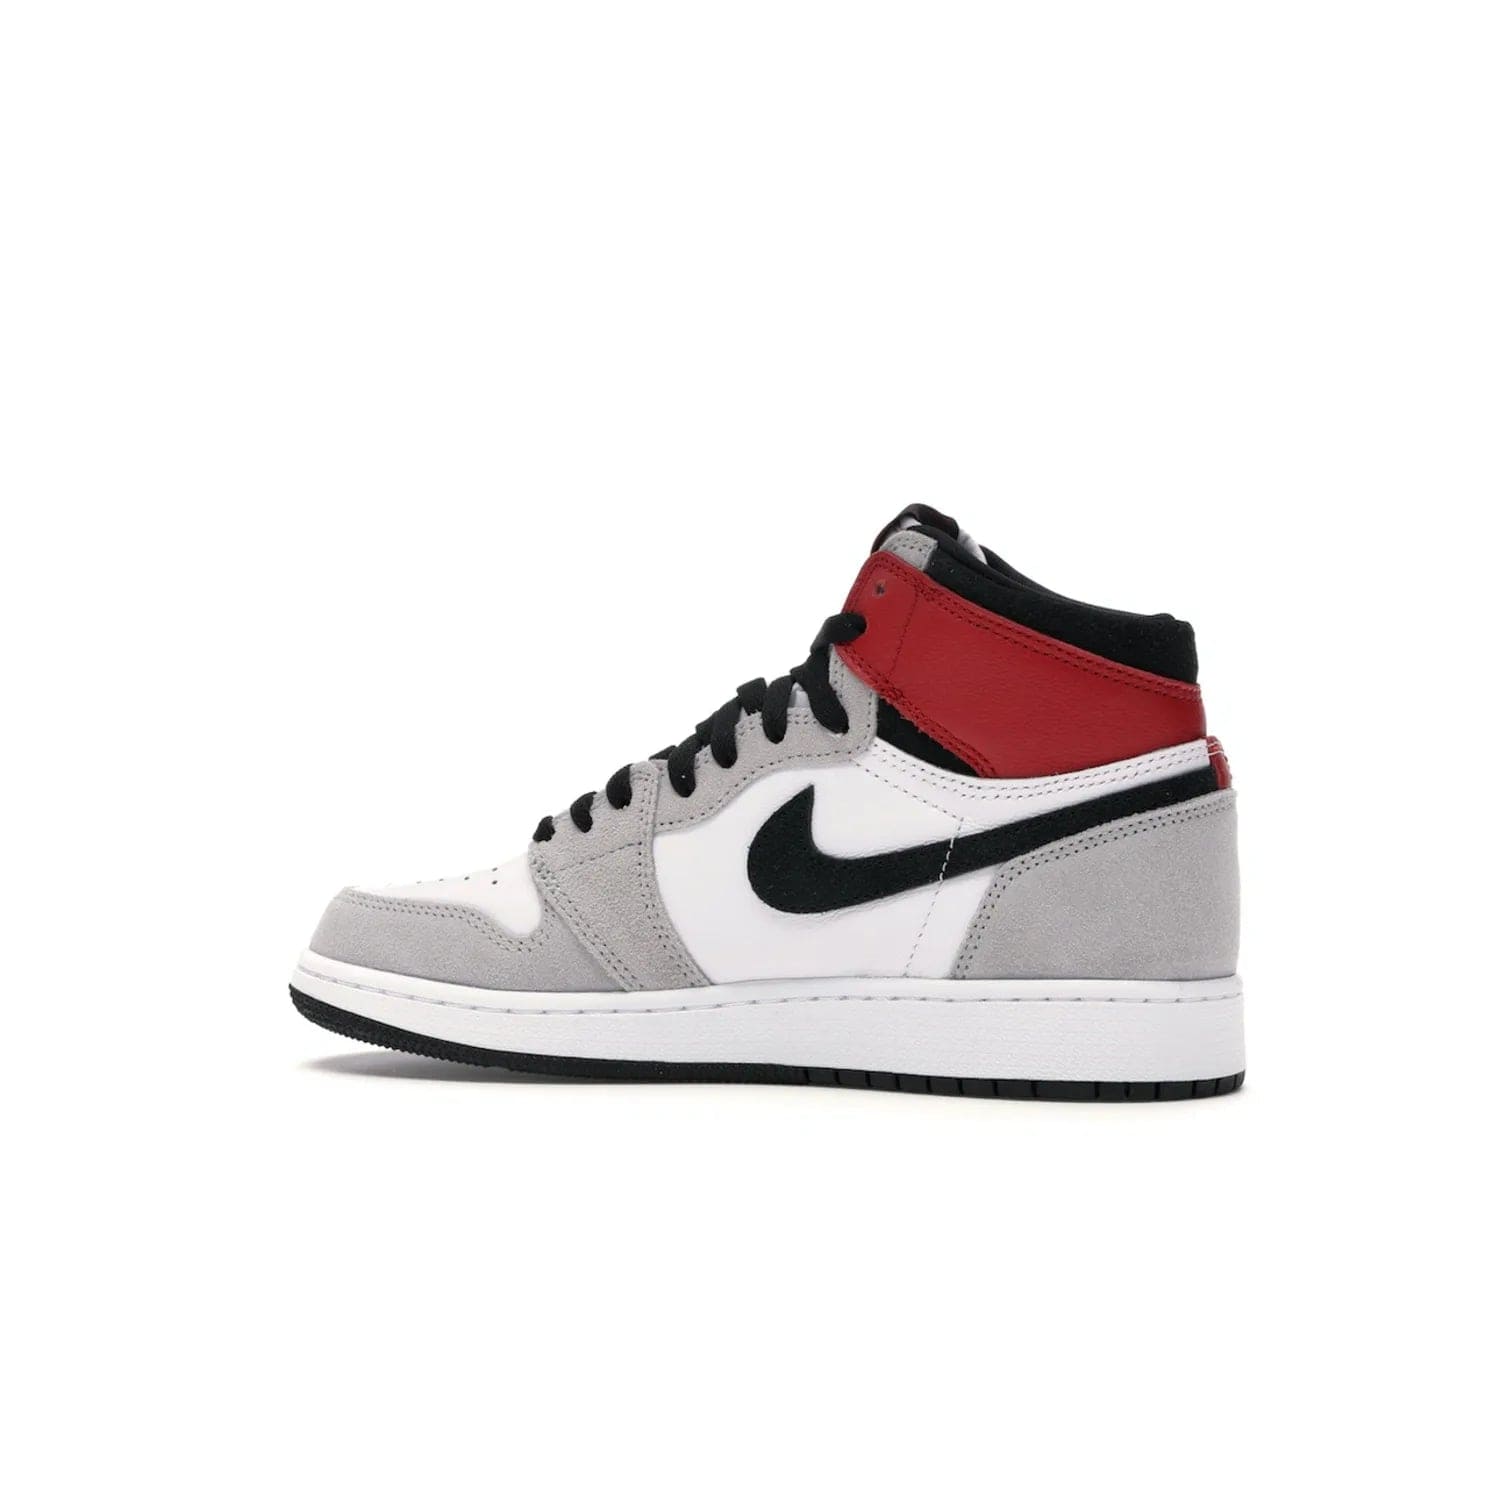 Jordan 1 Retro High Light Smoke Grey (GS) - Image 21 - Only at www.BallersClubKickz.com - Jordan 1 Retro High Light Smoke Grey (GS) features shades of grey, black, and Varsity Red with a bold silhouette. Premium white leather and suede overlays create a unique look. Released July 2020, offering style and performance. Perfect sneaker for any collector or fan.